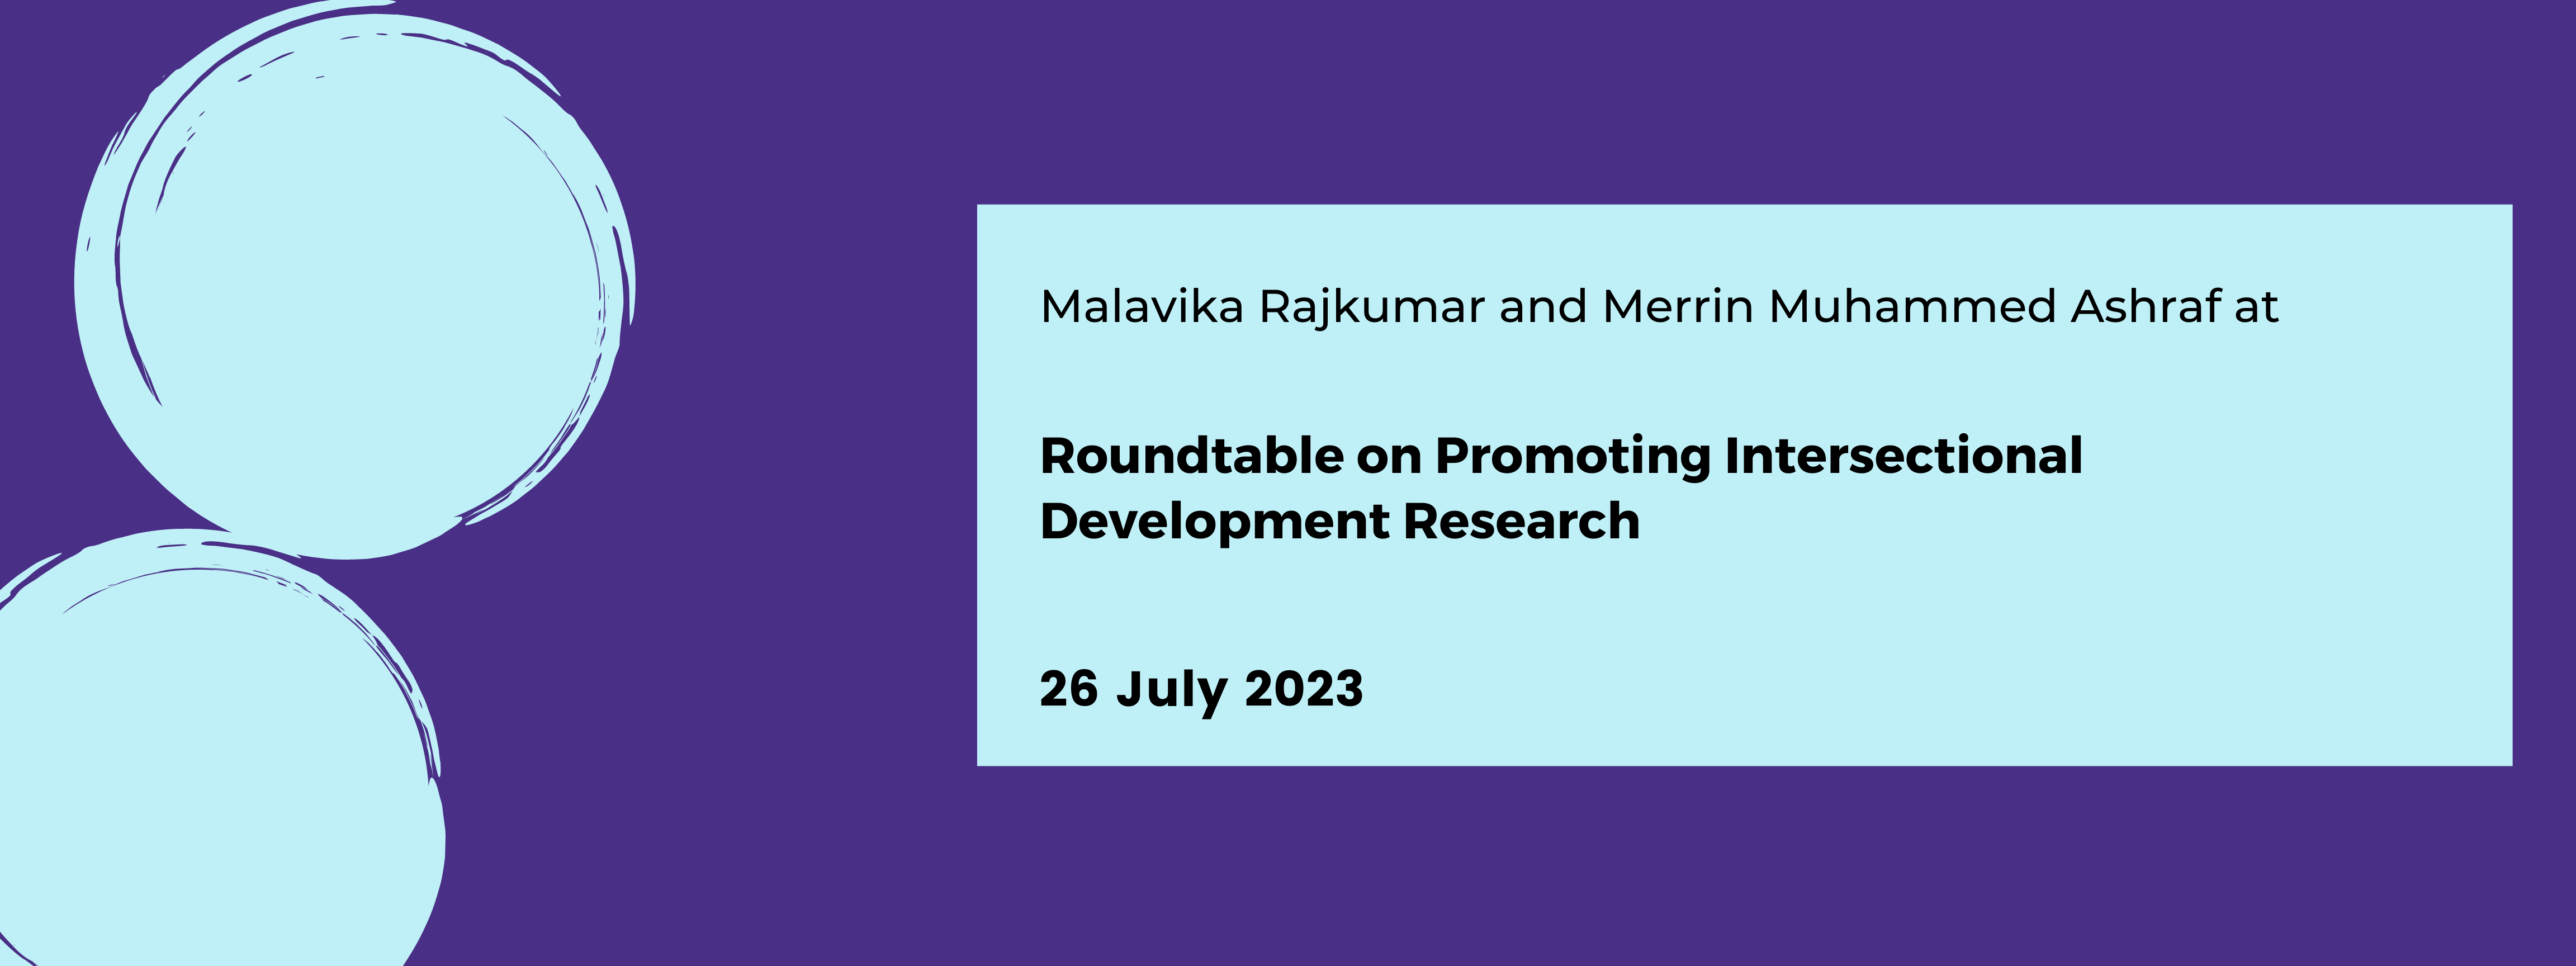 Banner for Promoting Intersectional Development Research Roundtable